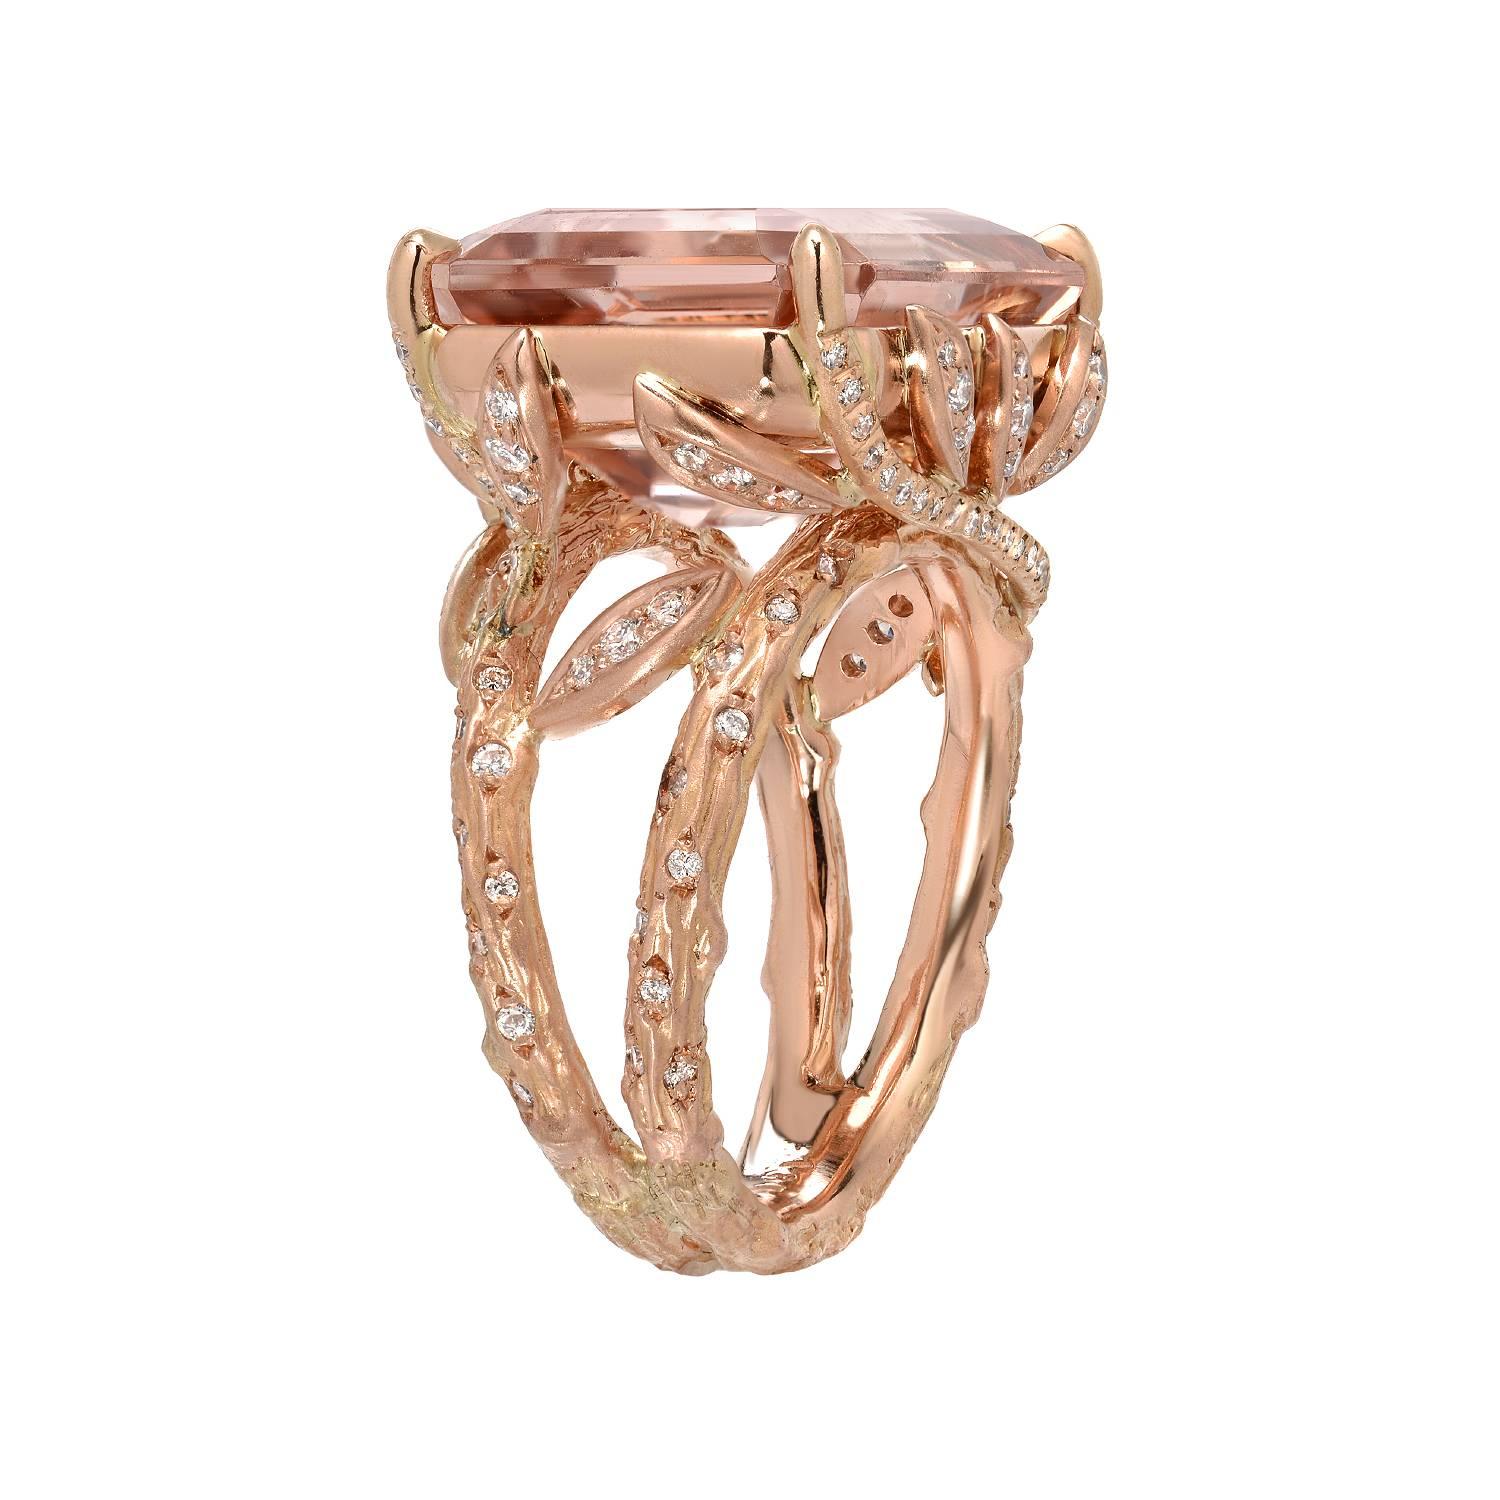 Very fine 14.49ct emerald cut Morganite, and 0.42ct total round brilliant diamonds, 18K rose gold ring.
Size 6. Re-sizing is complimentary upon request.